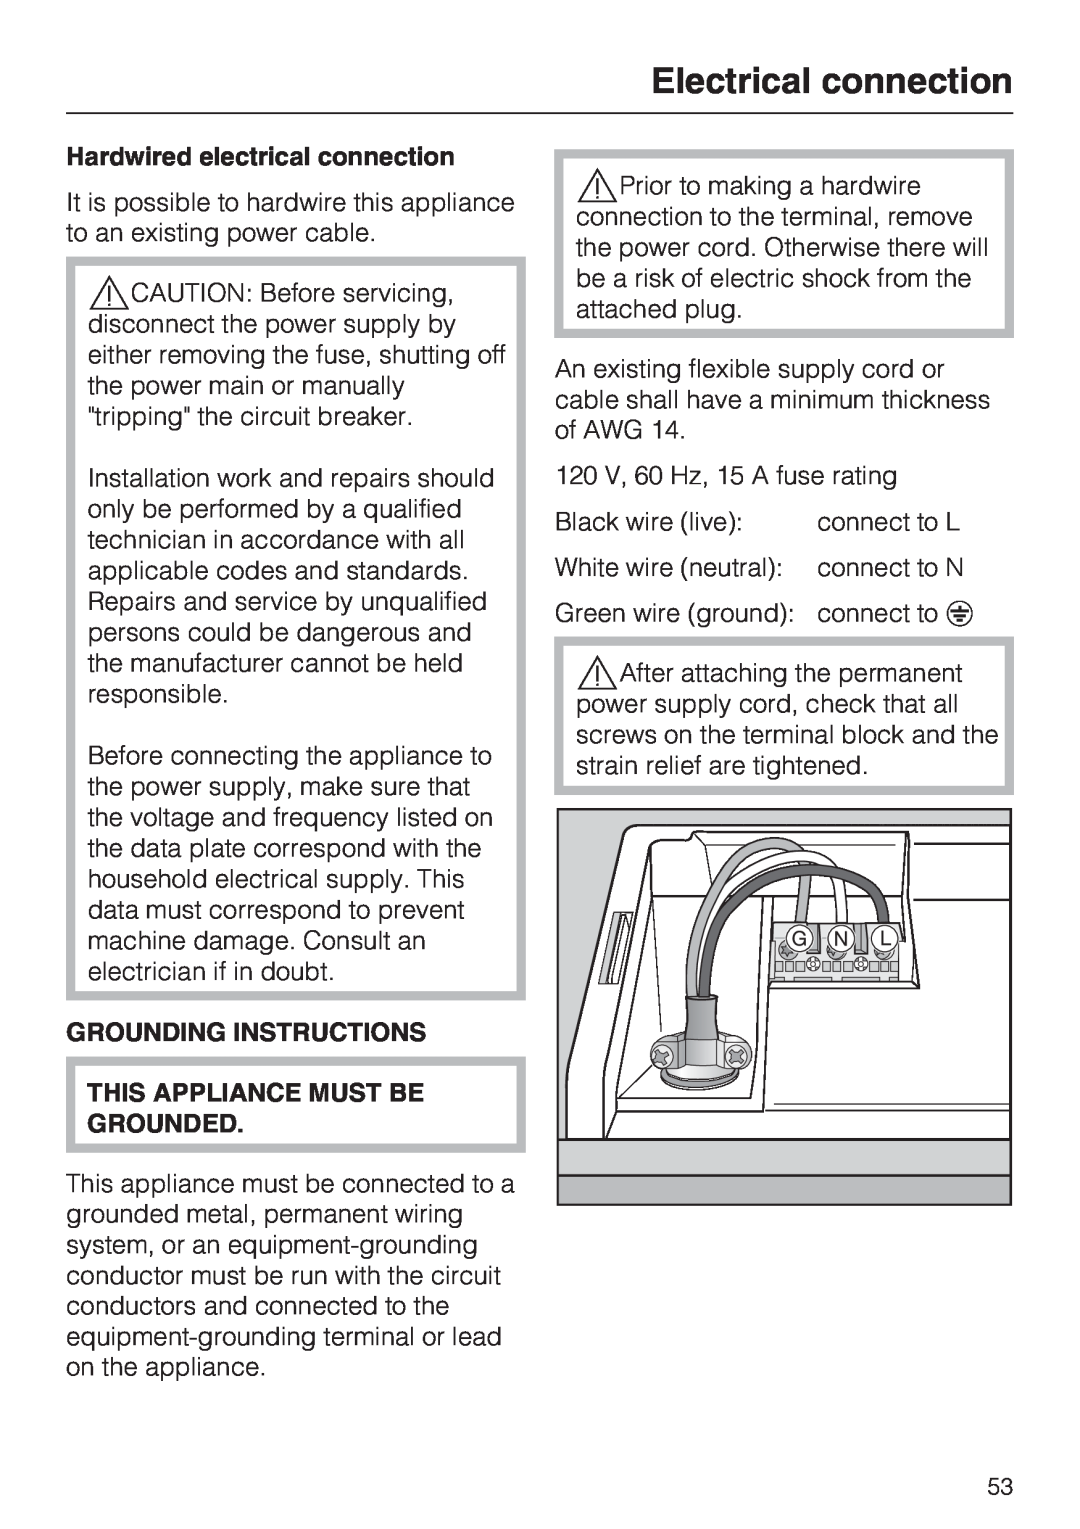 Miele G4281, G4286 manual Electrical connection, Hardwired electrical connection, Grounding Instructions 